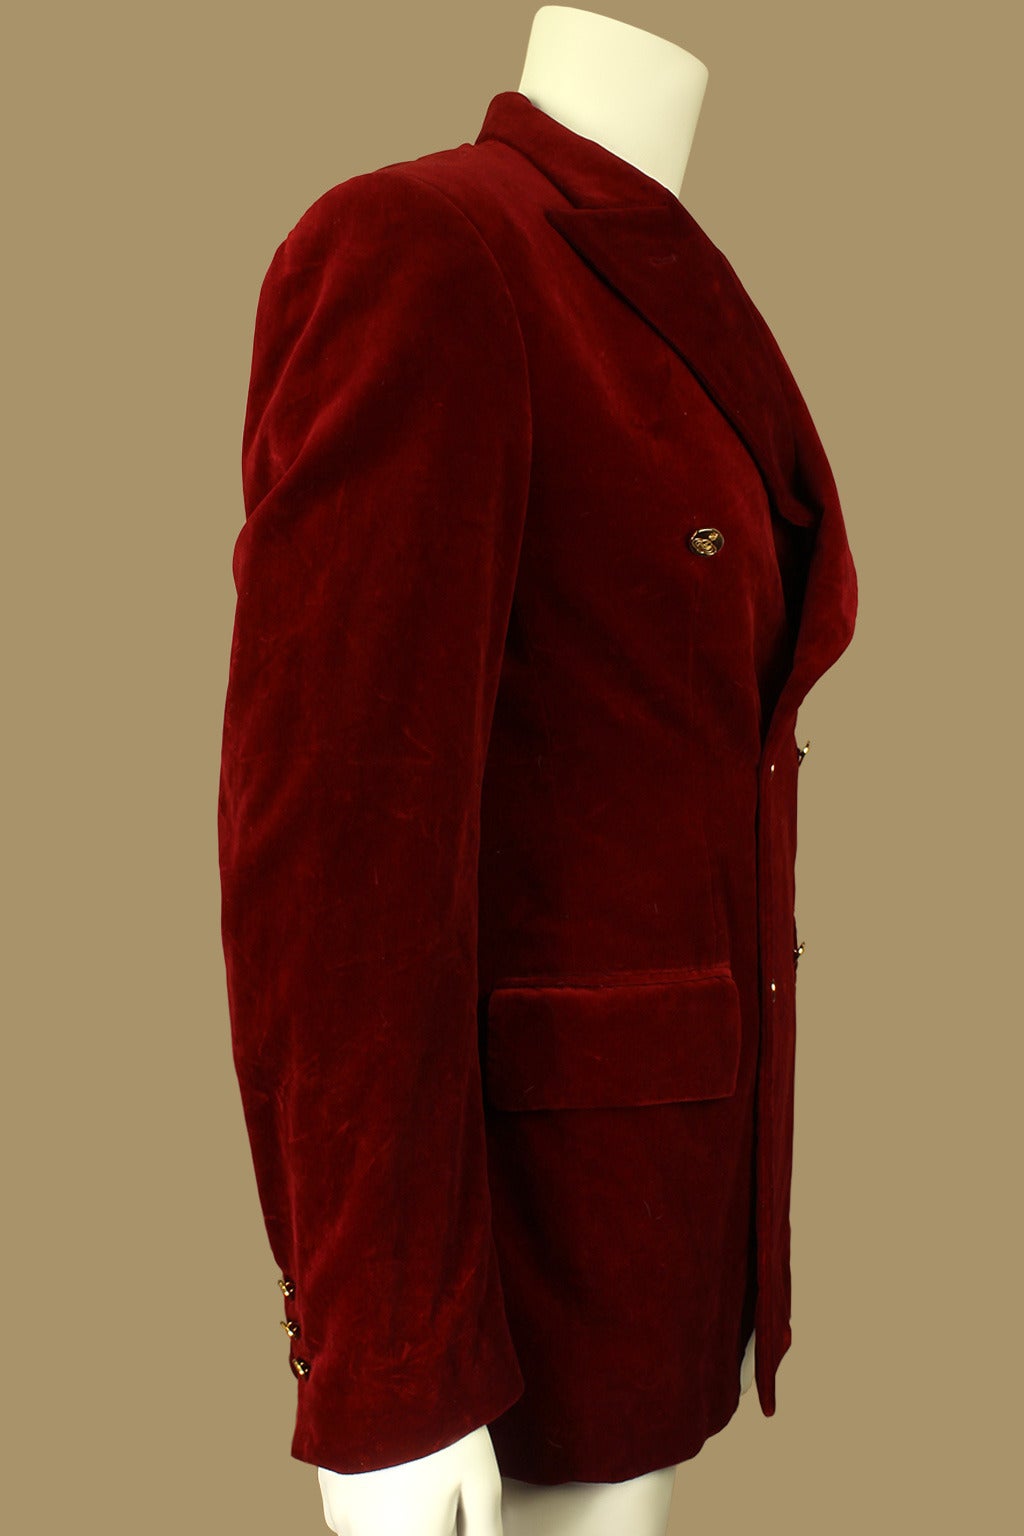 This is the perfect jacket to wear to a holiday party. It is double-breasted with signature gold Vivienne Westwood buttons down the front and on the sleeves. It is in a sumptuous dark red velvet.